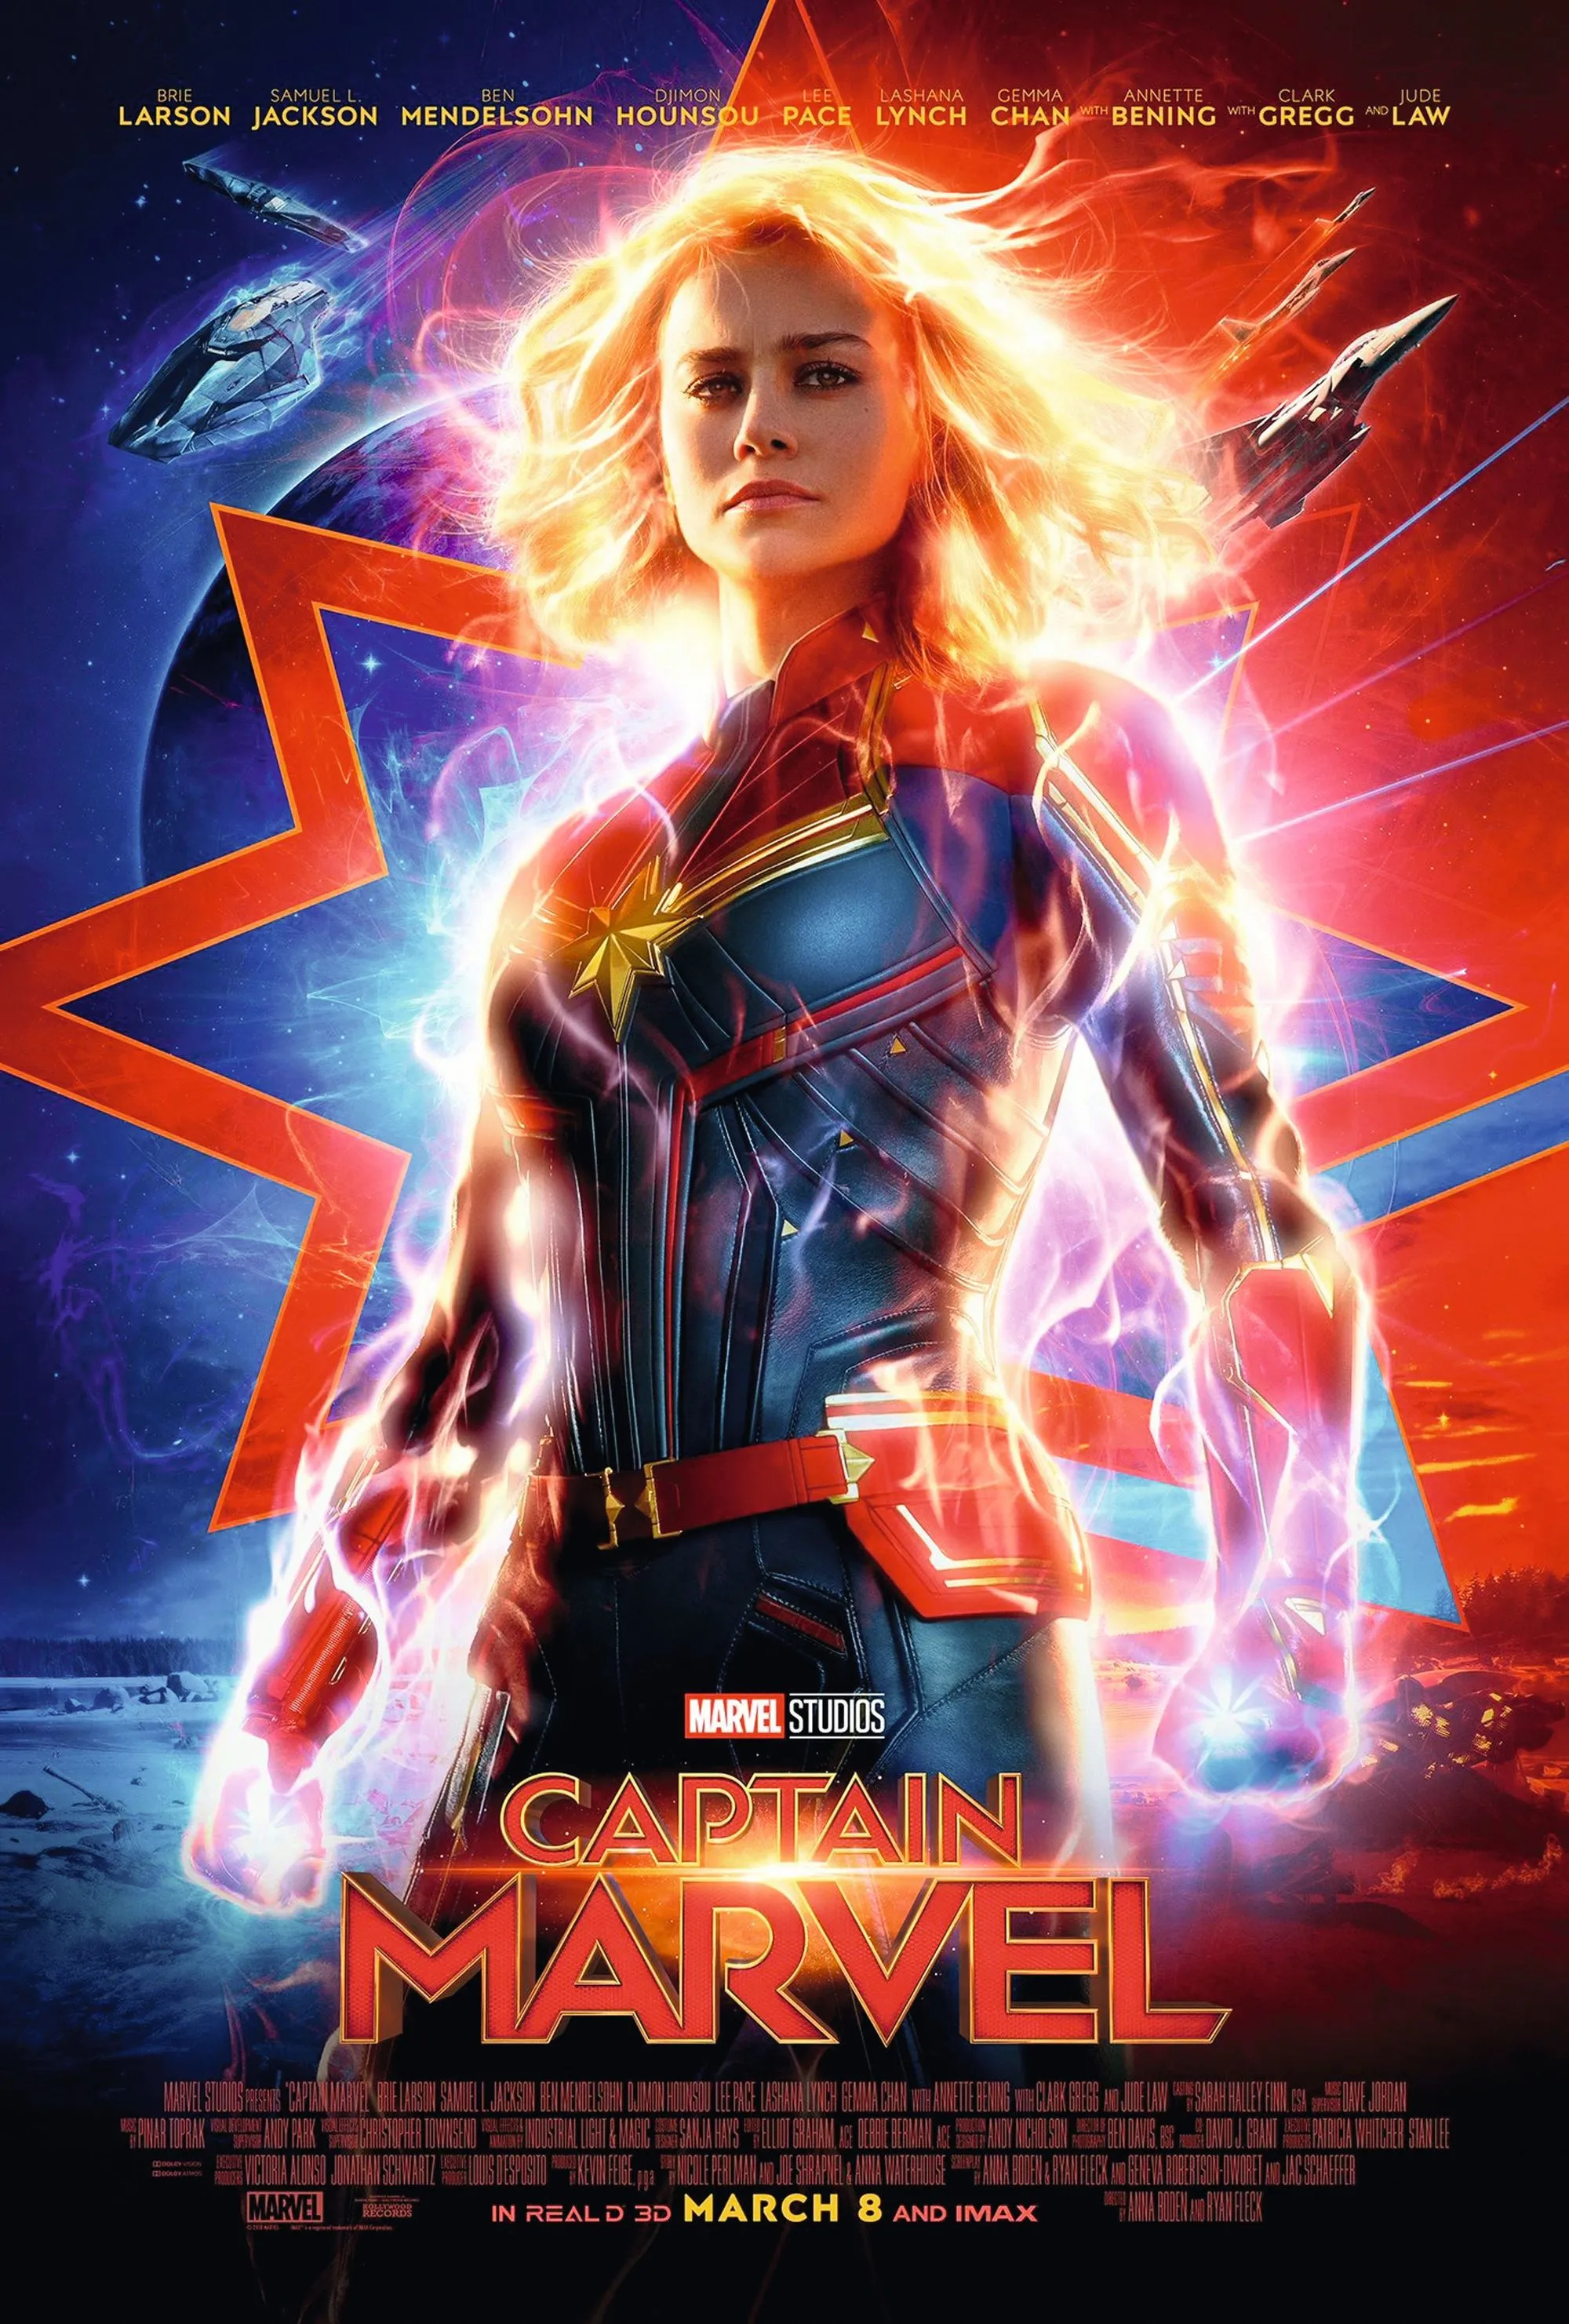 Captain Marvel, by Anna Boden and Ryan Fleck, 2019